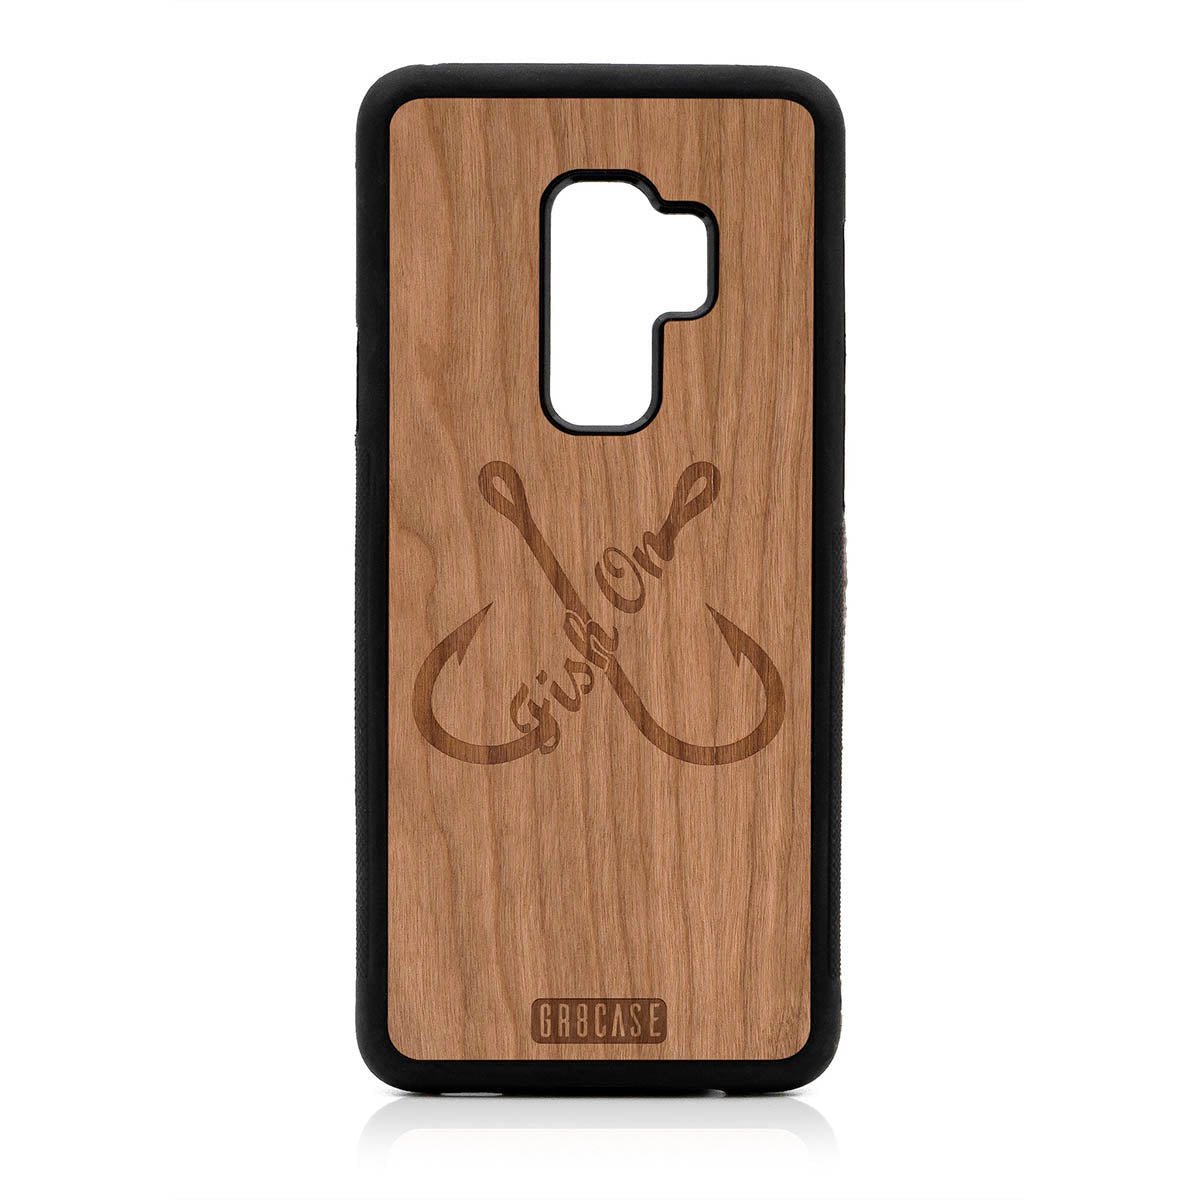 Fish On (Fish Hooks) Design Wood Case For Samsung Galaxy S9 Plus by GR8CASE